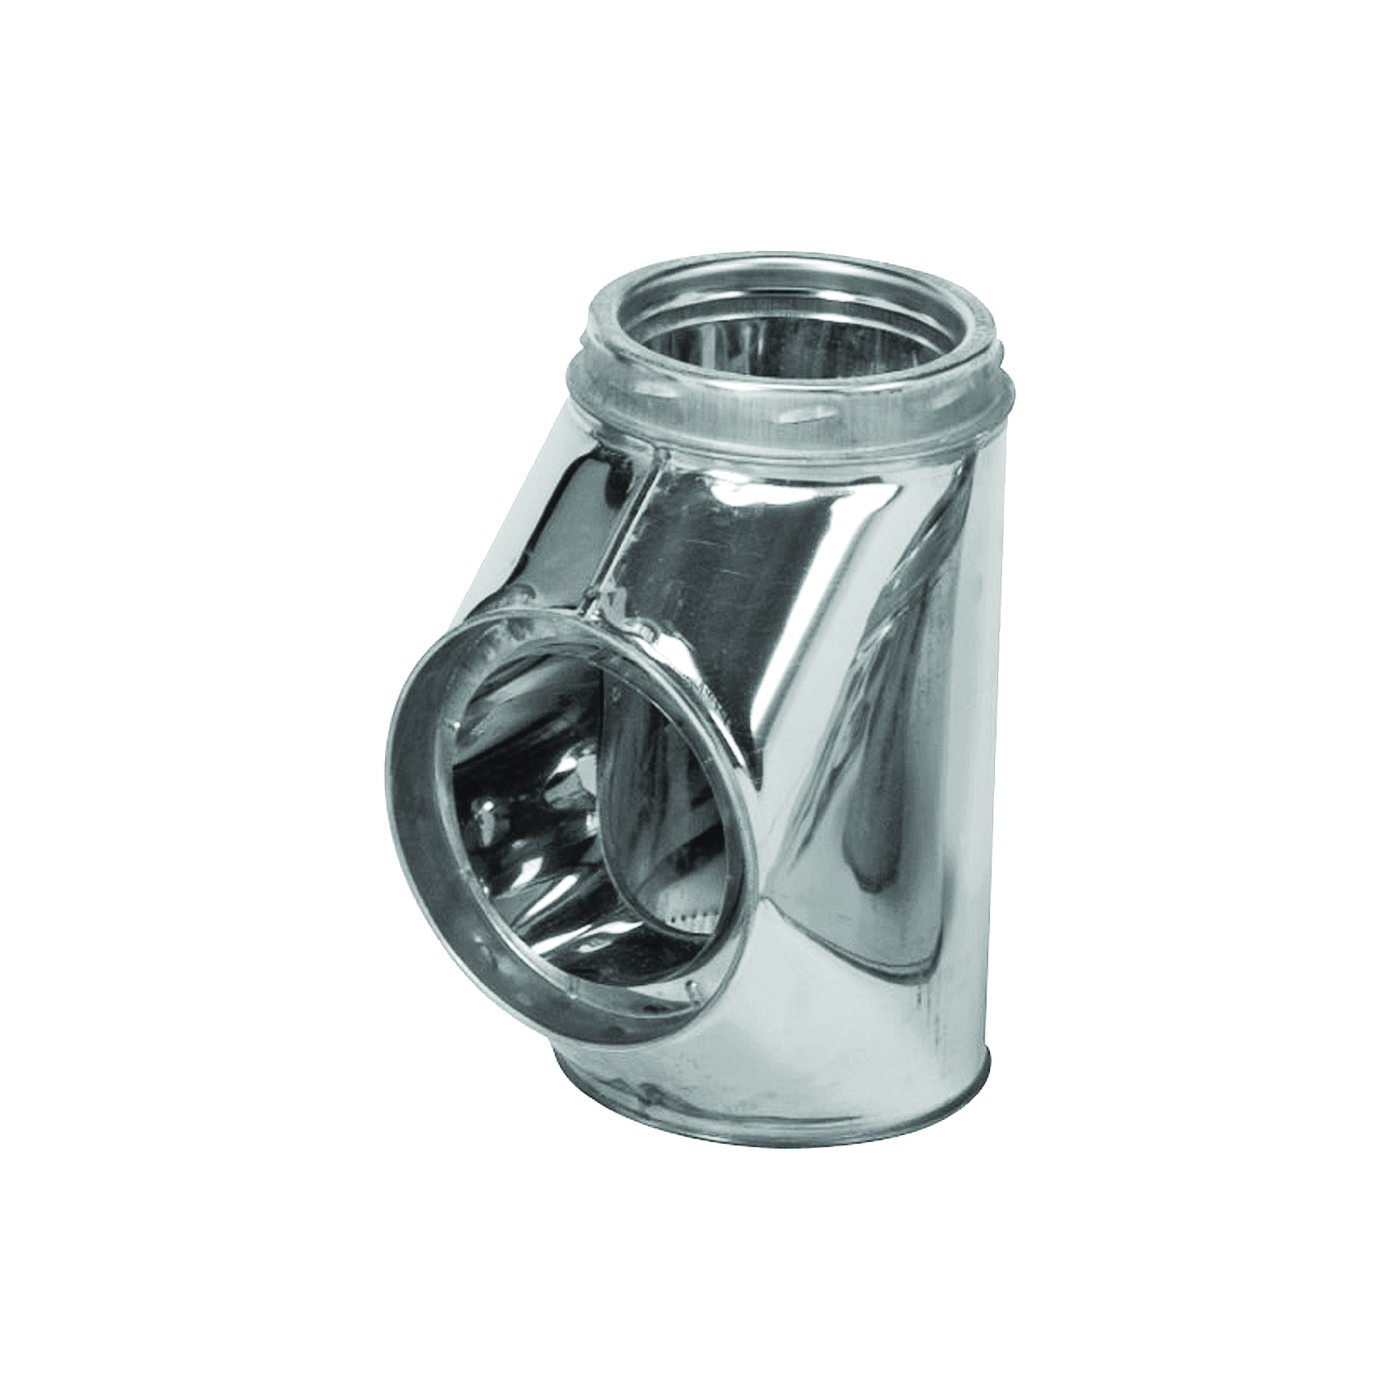 206100 Insulated Chimney Tee with Cap, 6-1/4 in Connection, Stainless Steel